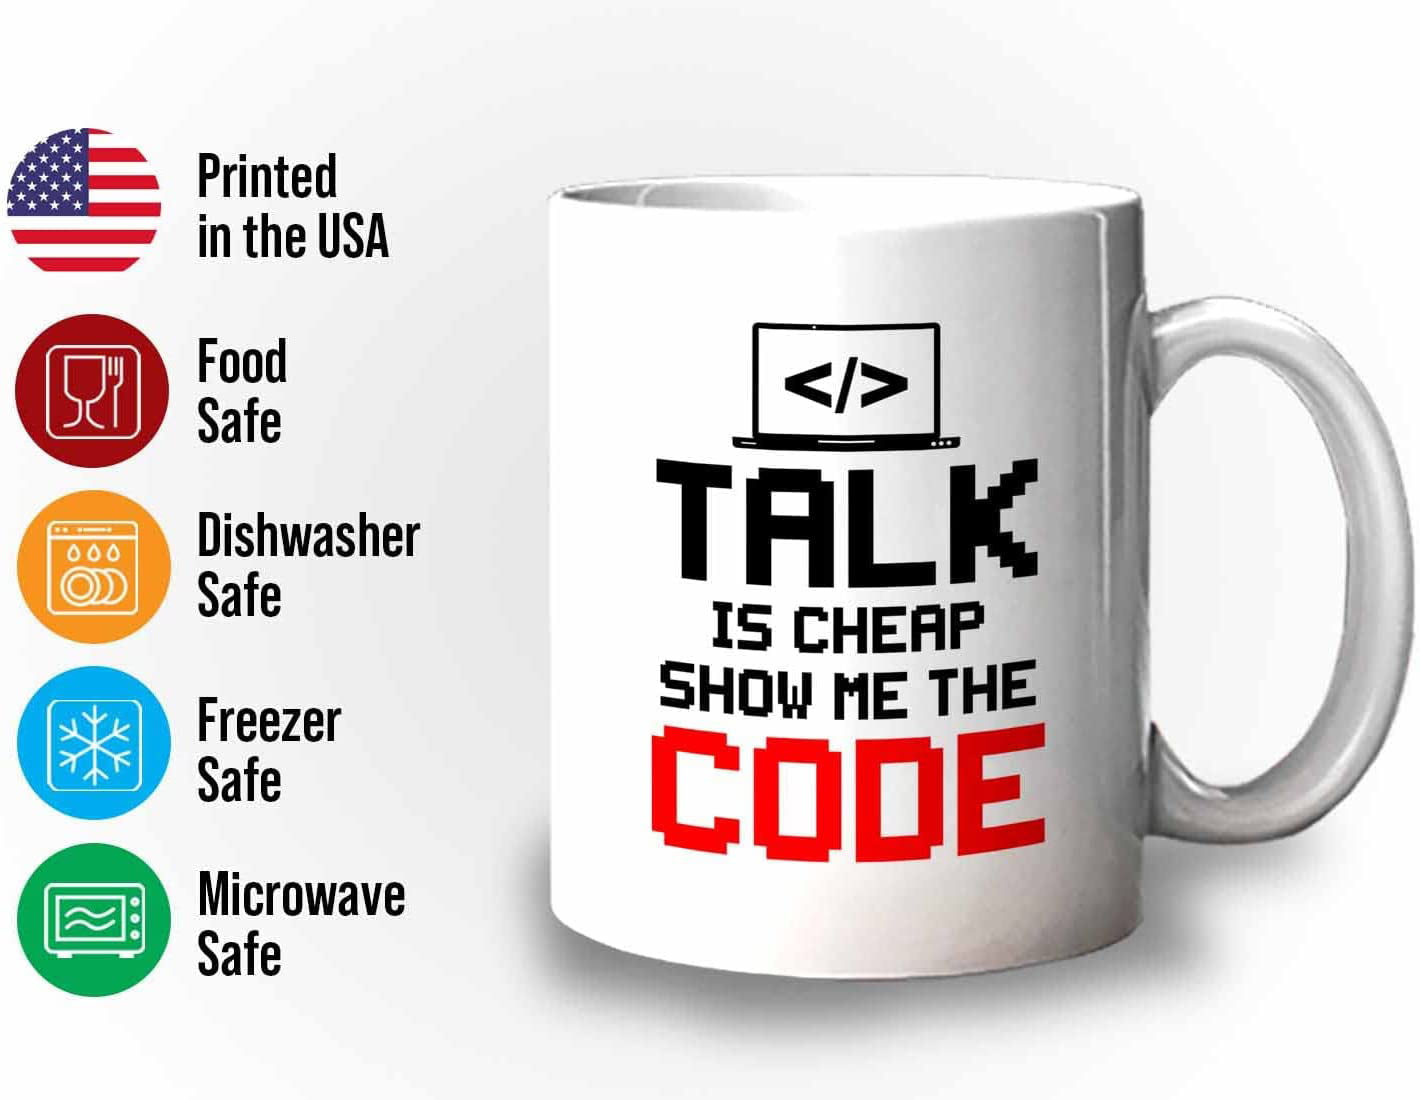 Programmer Gift Talk is cheap show me the code Poster by Tobias